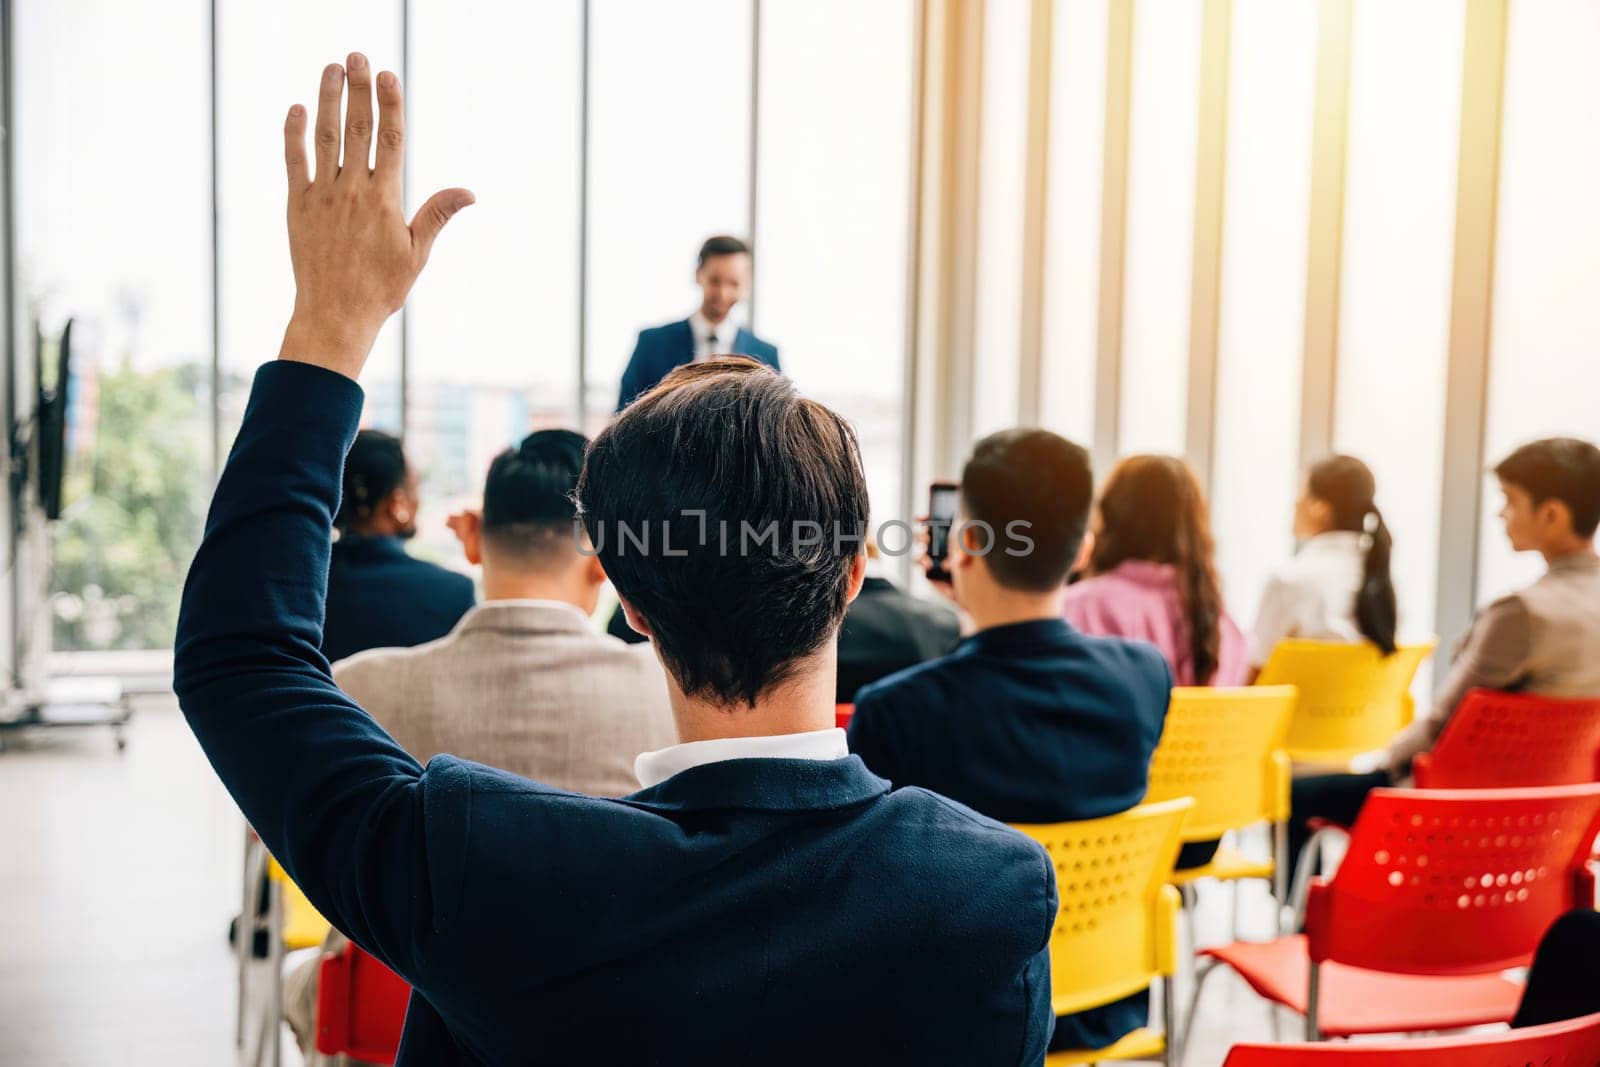 Curious individual in a diverse group raises a hand during a conference. This active participation showcases collaboration teamwork and engagement in discussions by Sorapop